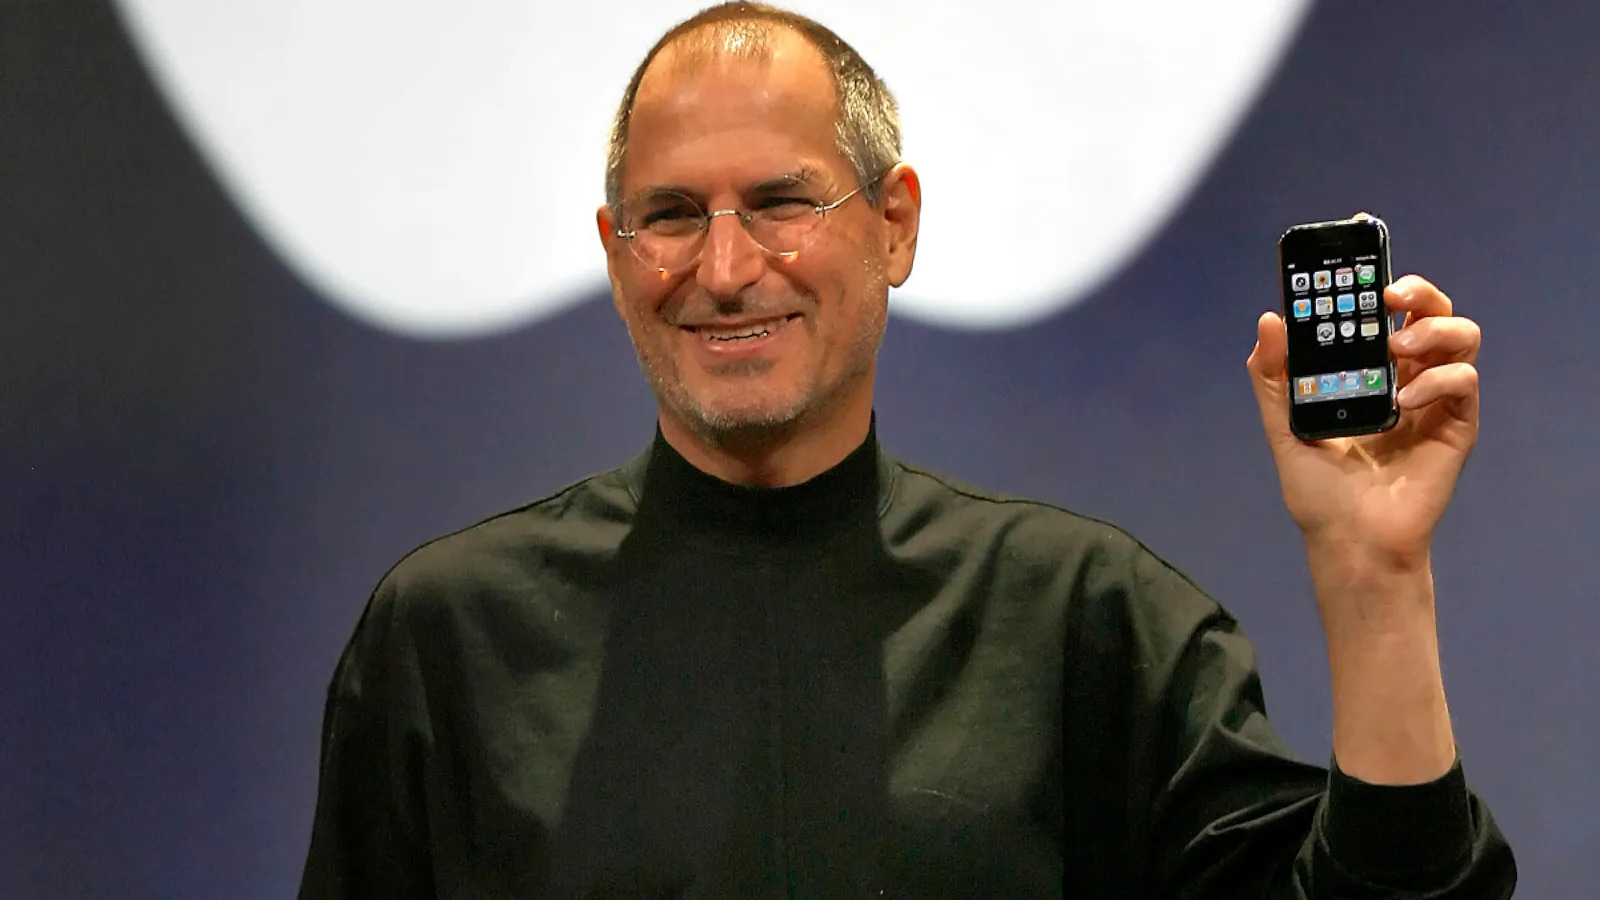 20-facts-about-steve-jobs